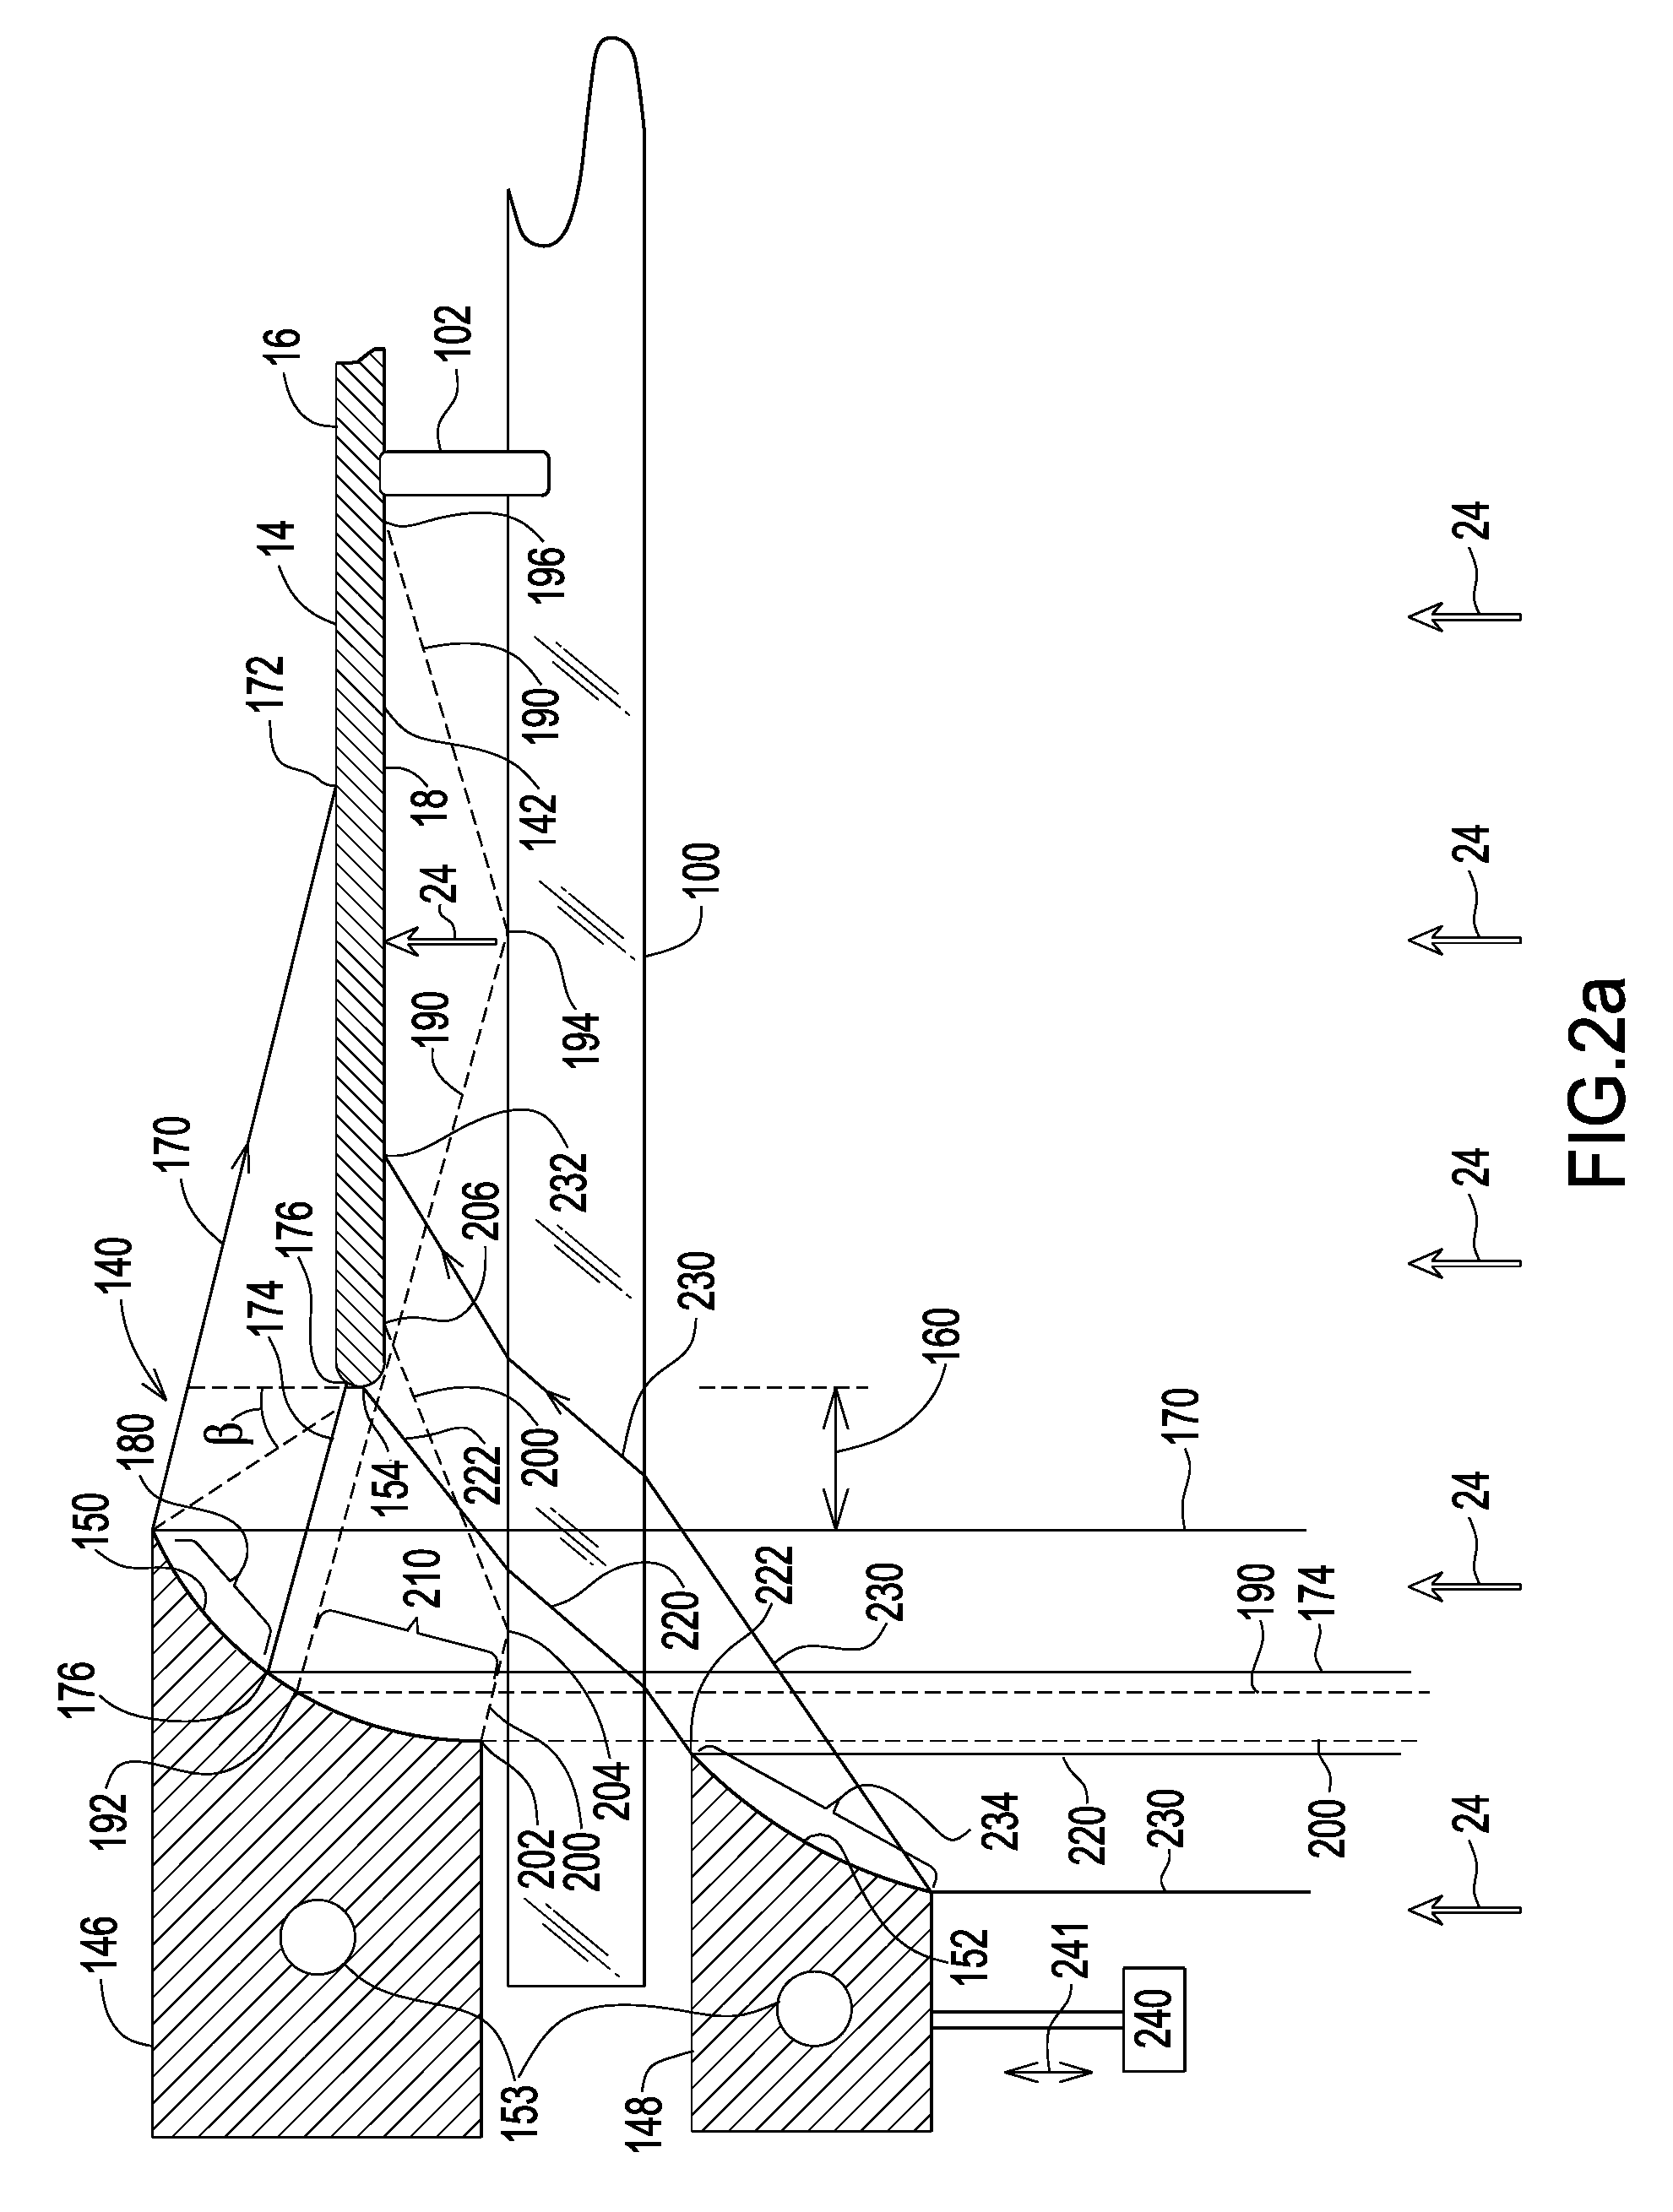 Enhanced rapid thermal processing apparatus and method